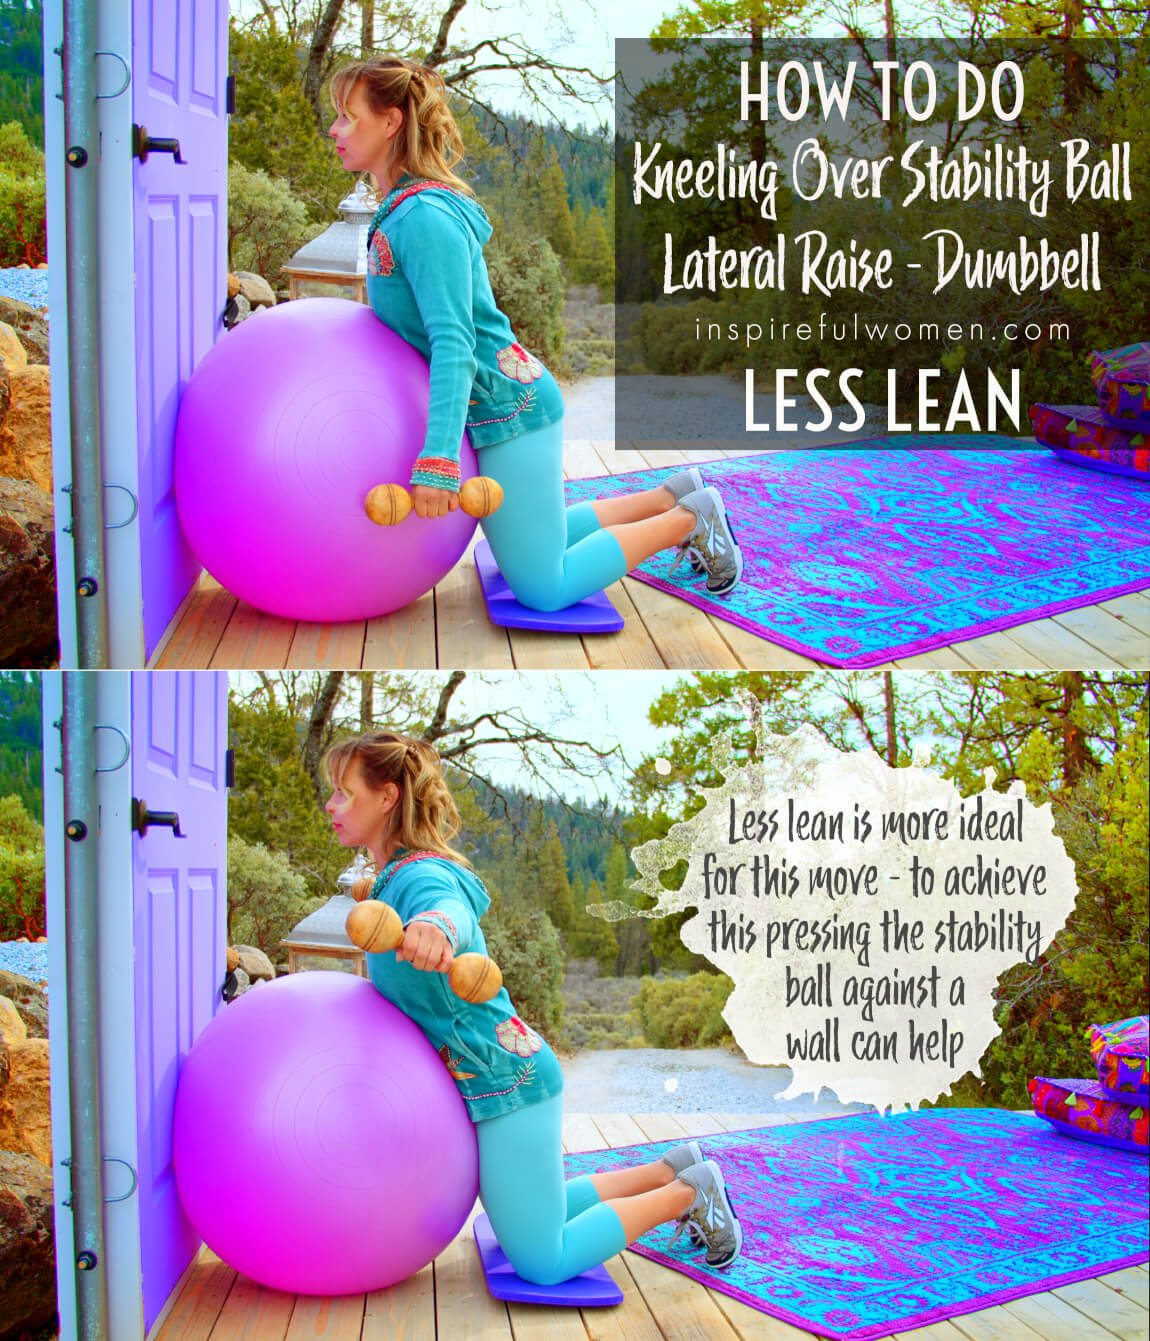 how-to-do-kneeling-over-stability-ball-lateral-raise-dumbbell-delt-exercise-at-home-women-over-40